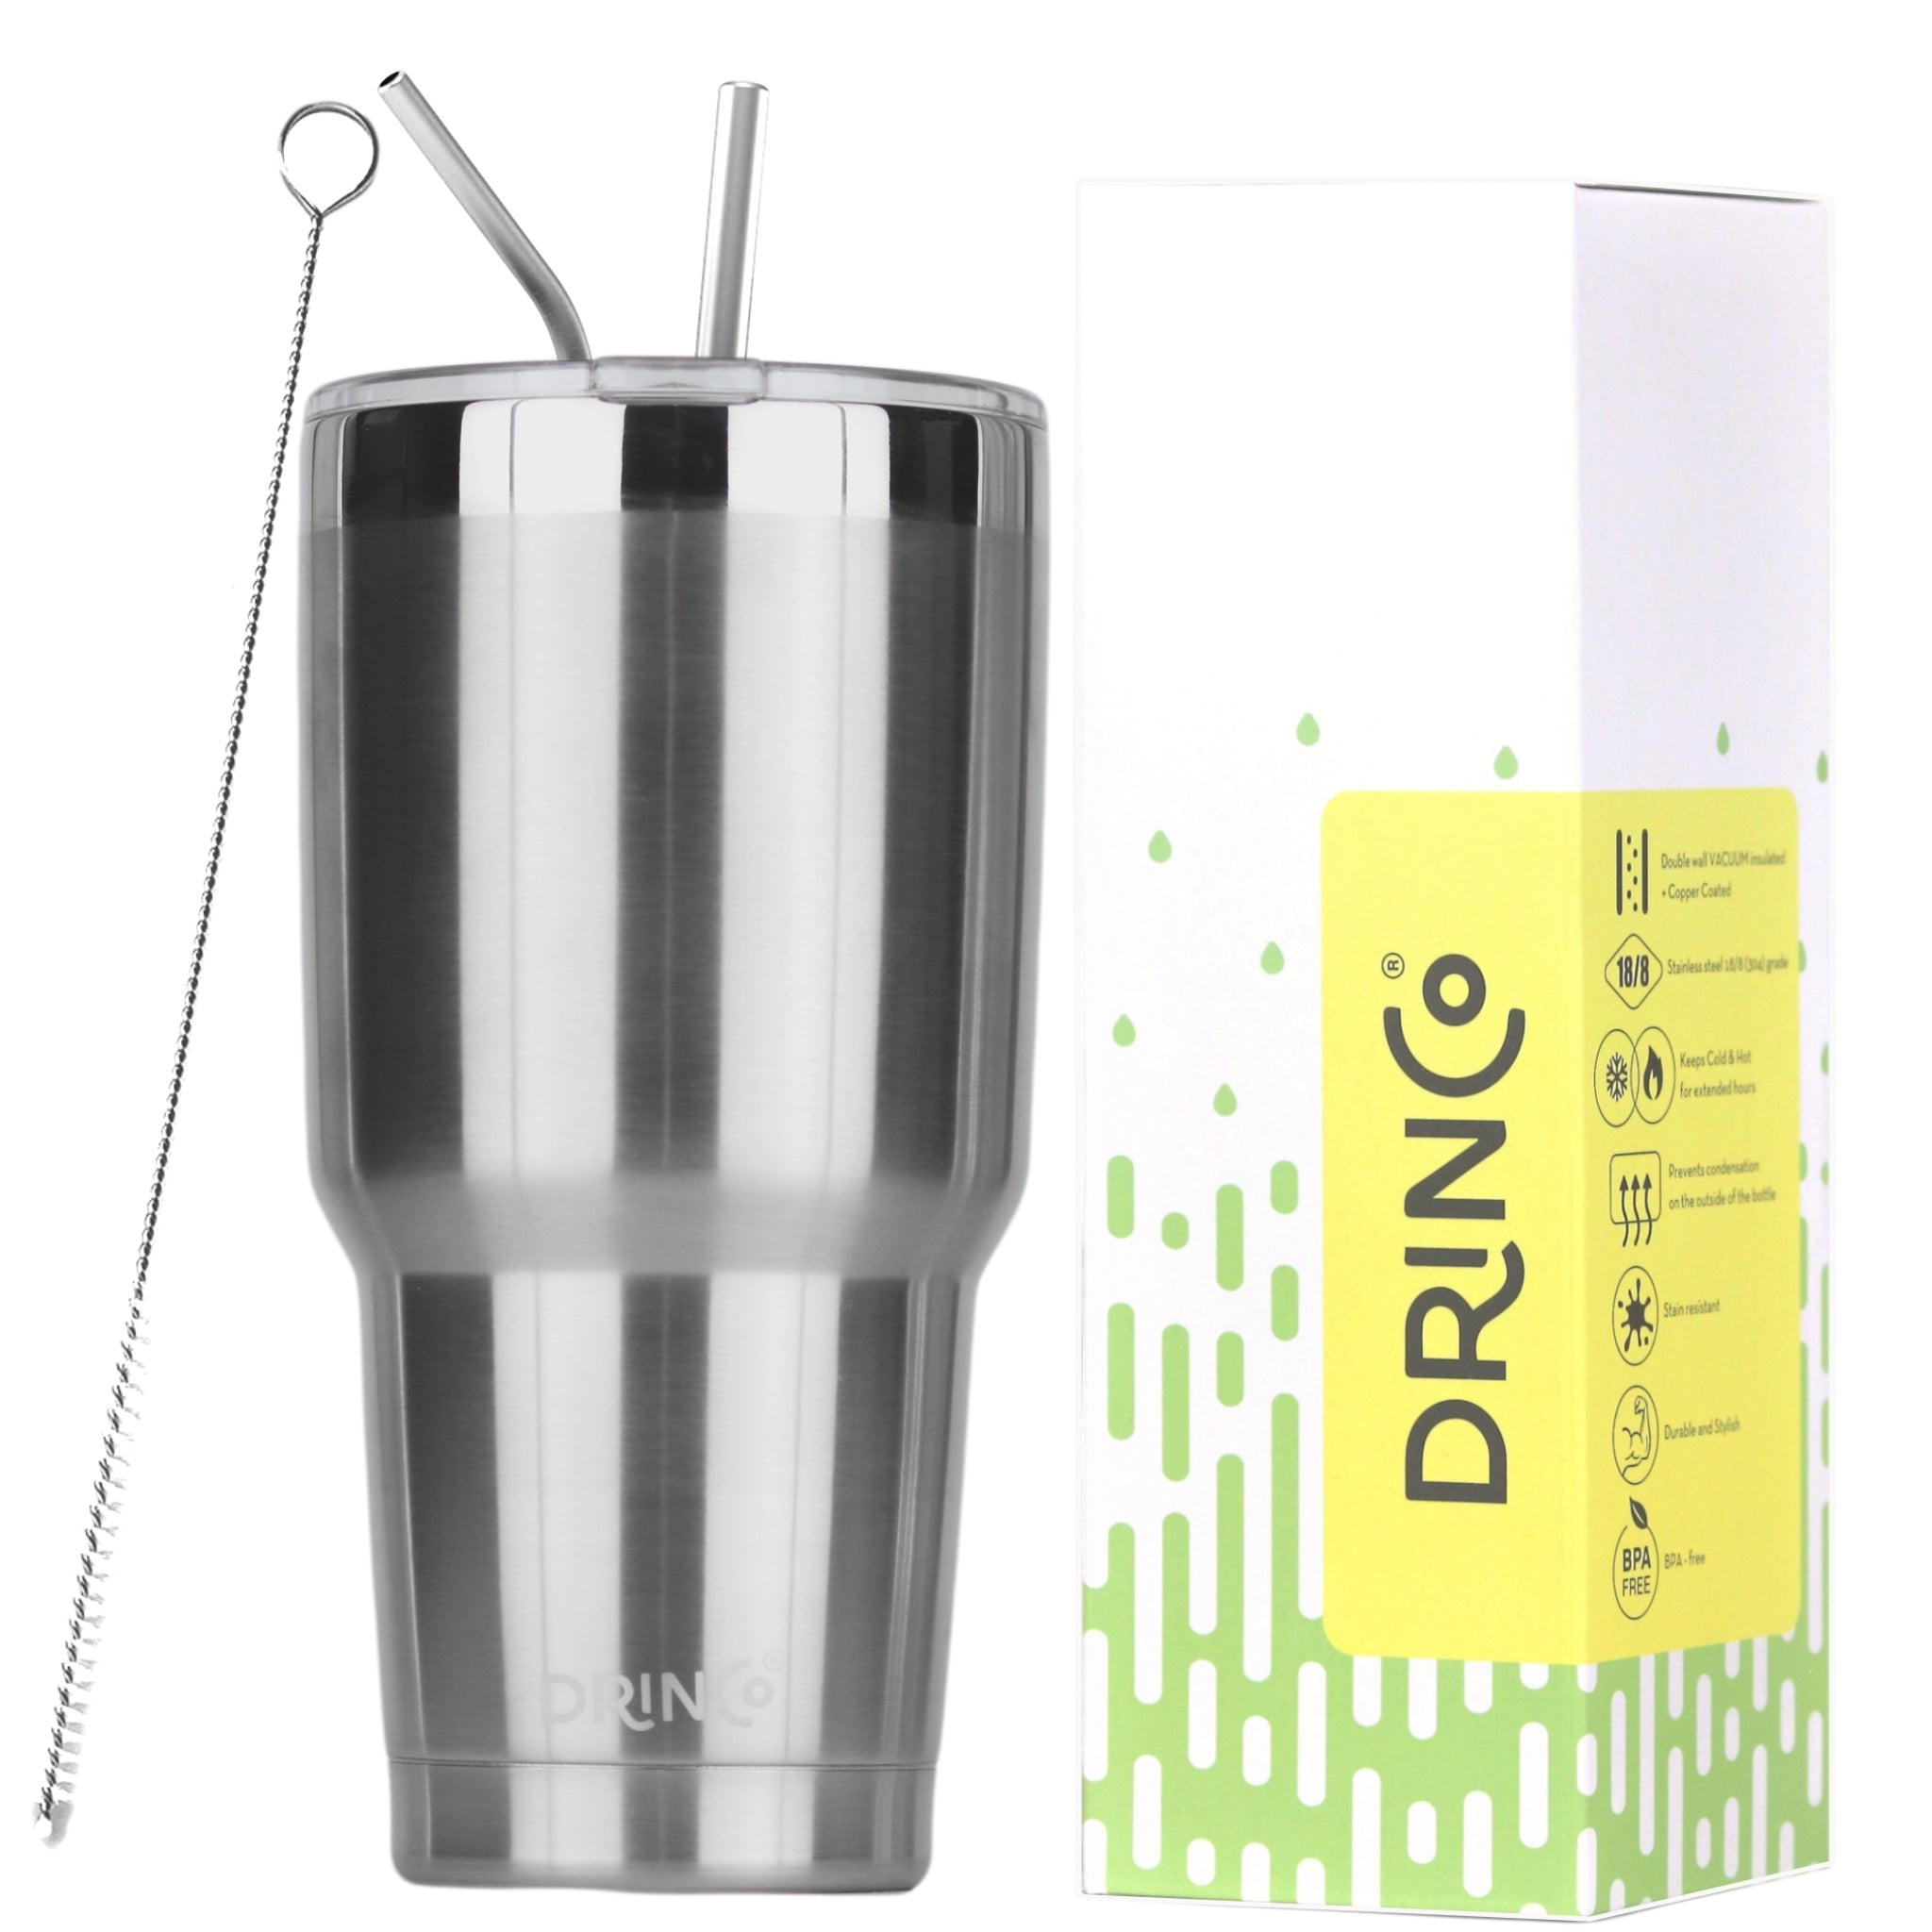 DRINCO® 30oz Insulated Tumbler Spill Proof Lid w/2 Straws (Brushed